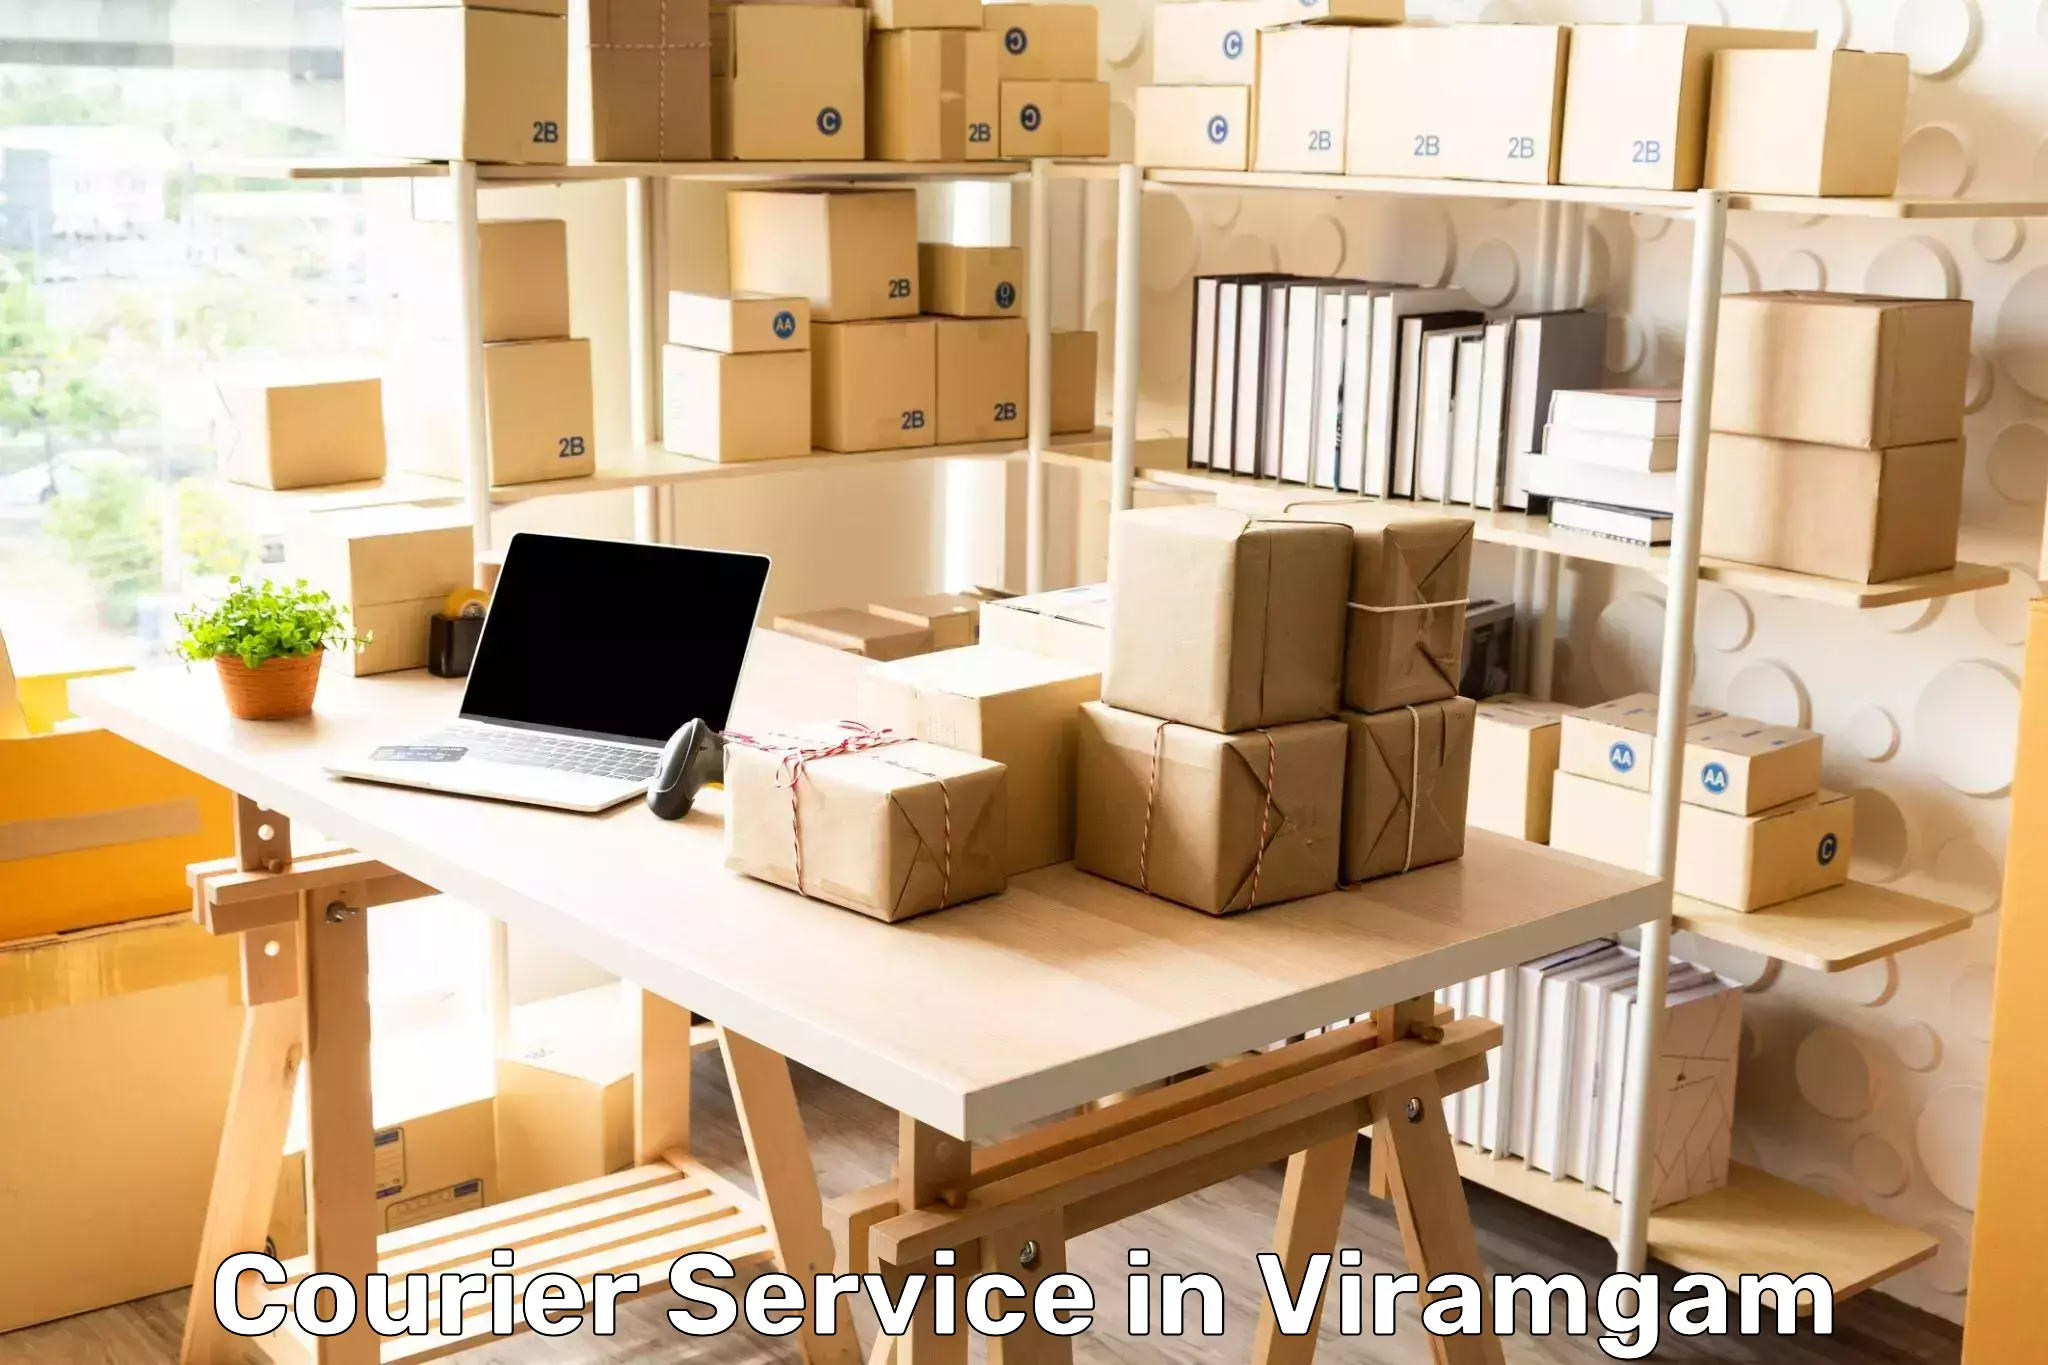 Same-day delivery solutions in Viramgam